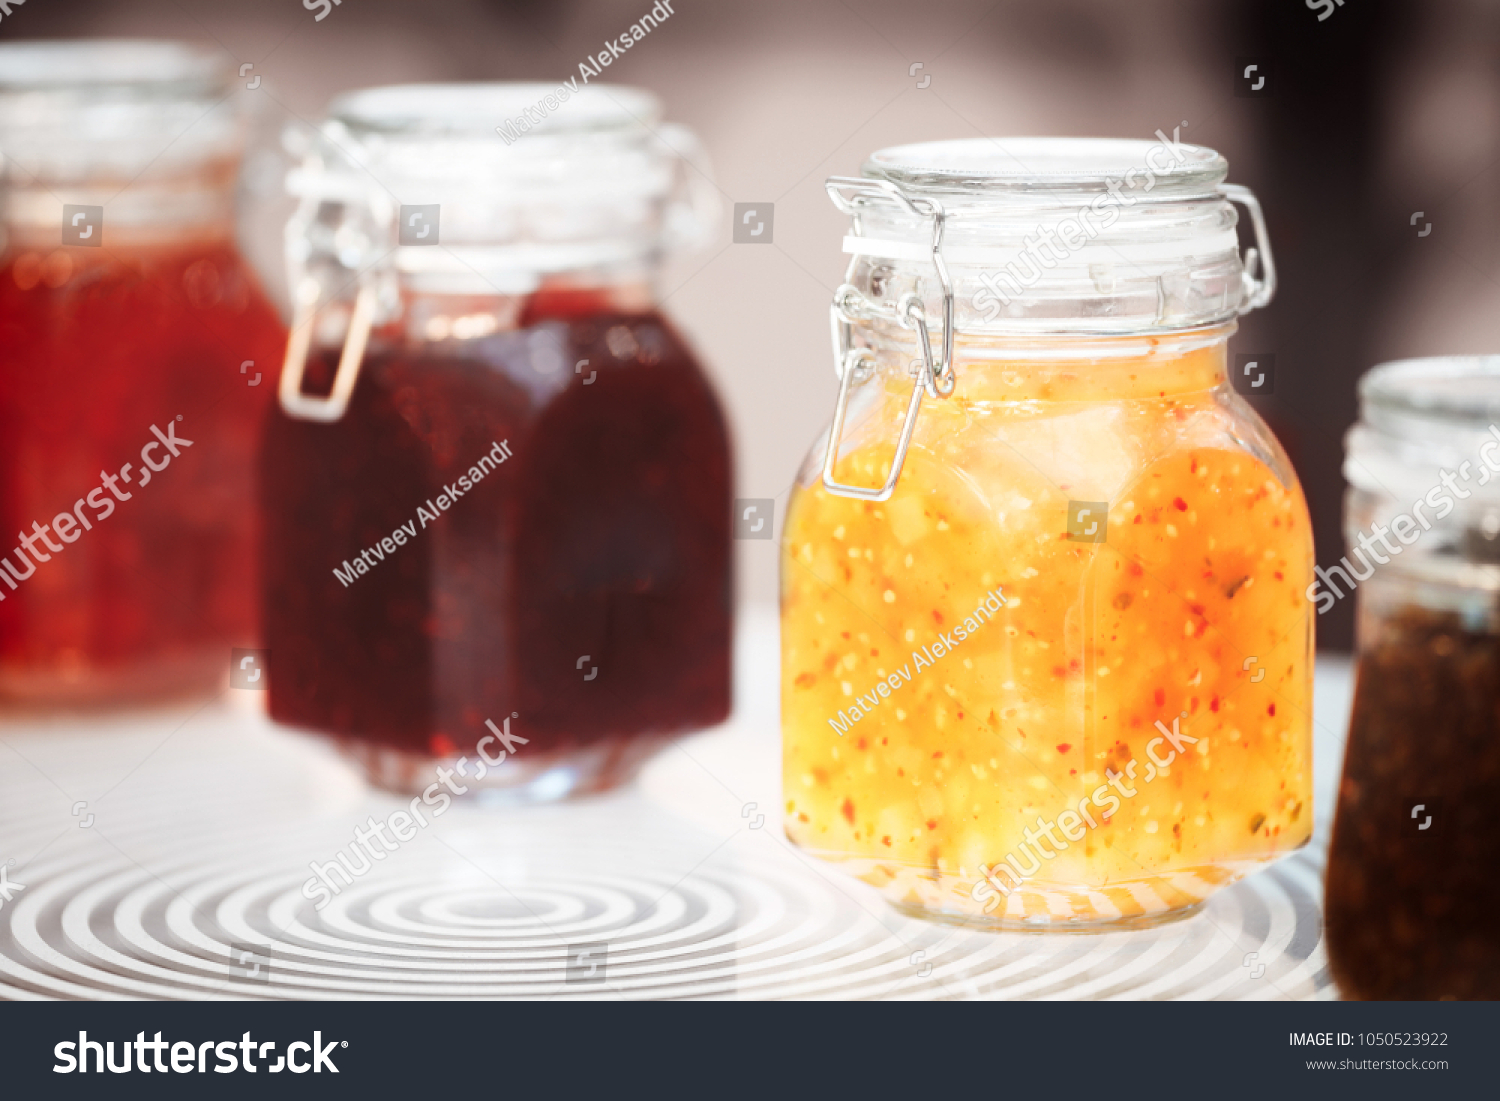 Close-up row of several glass with red yellow orange jars jam conserve confiture pozzy on table, breakfast concept, kitchen background, healthy eating concept, conservation concept. #1050523922